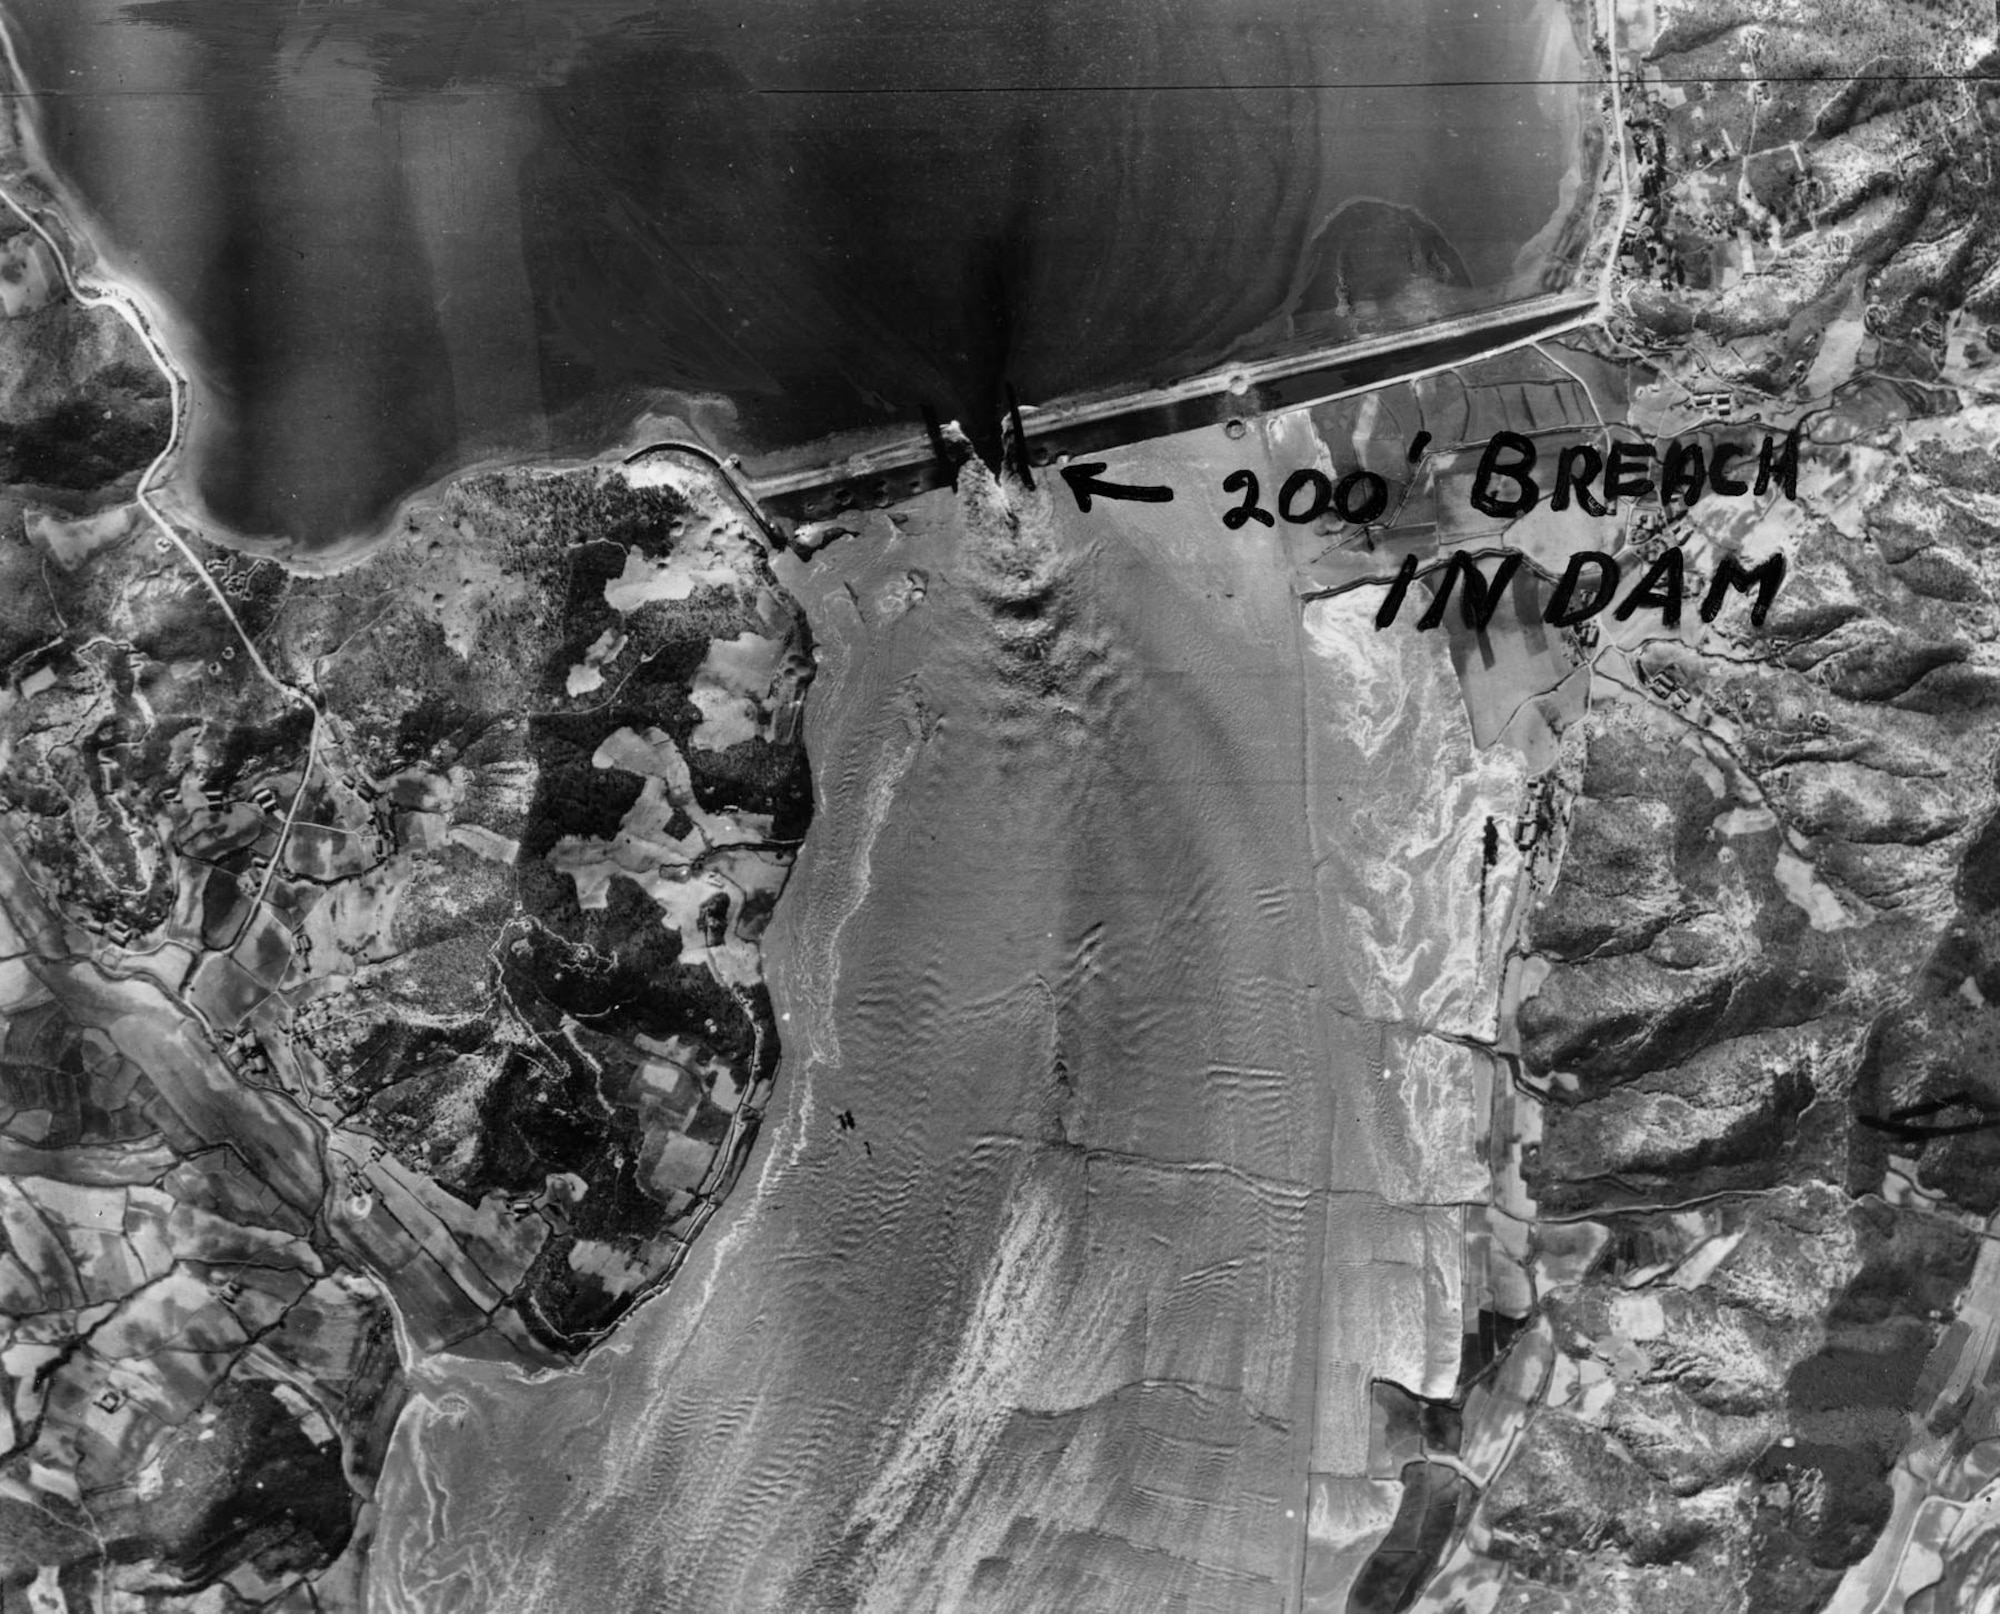 On May 16, 1953, F-84s scored several direct hits against the 230-ft thick Chasan Dam 25 miles north of Pyongyang, releasing a devastating flood. The torrent of water that raced down the valley washed out everything in its path, including roads, train tracks and two rail bridges. (U.S. Air Force photo)